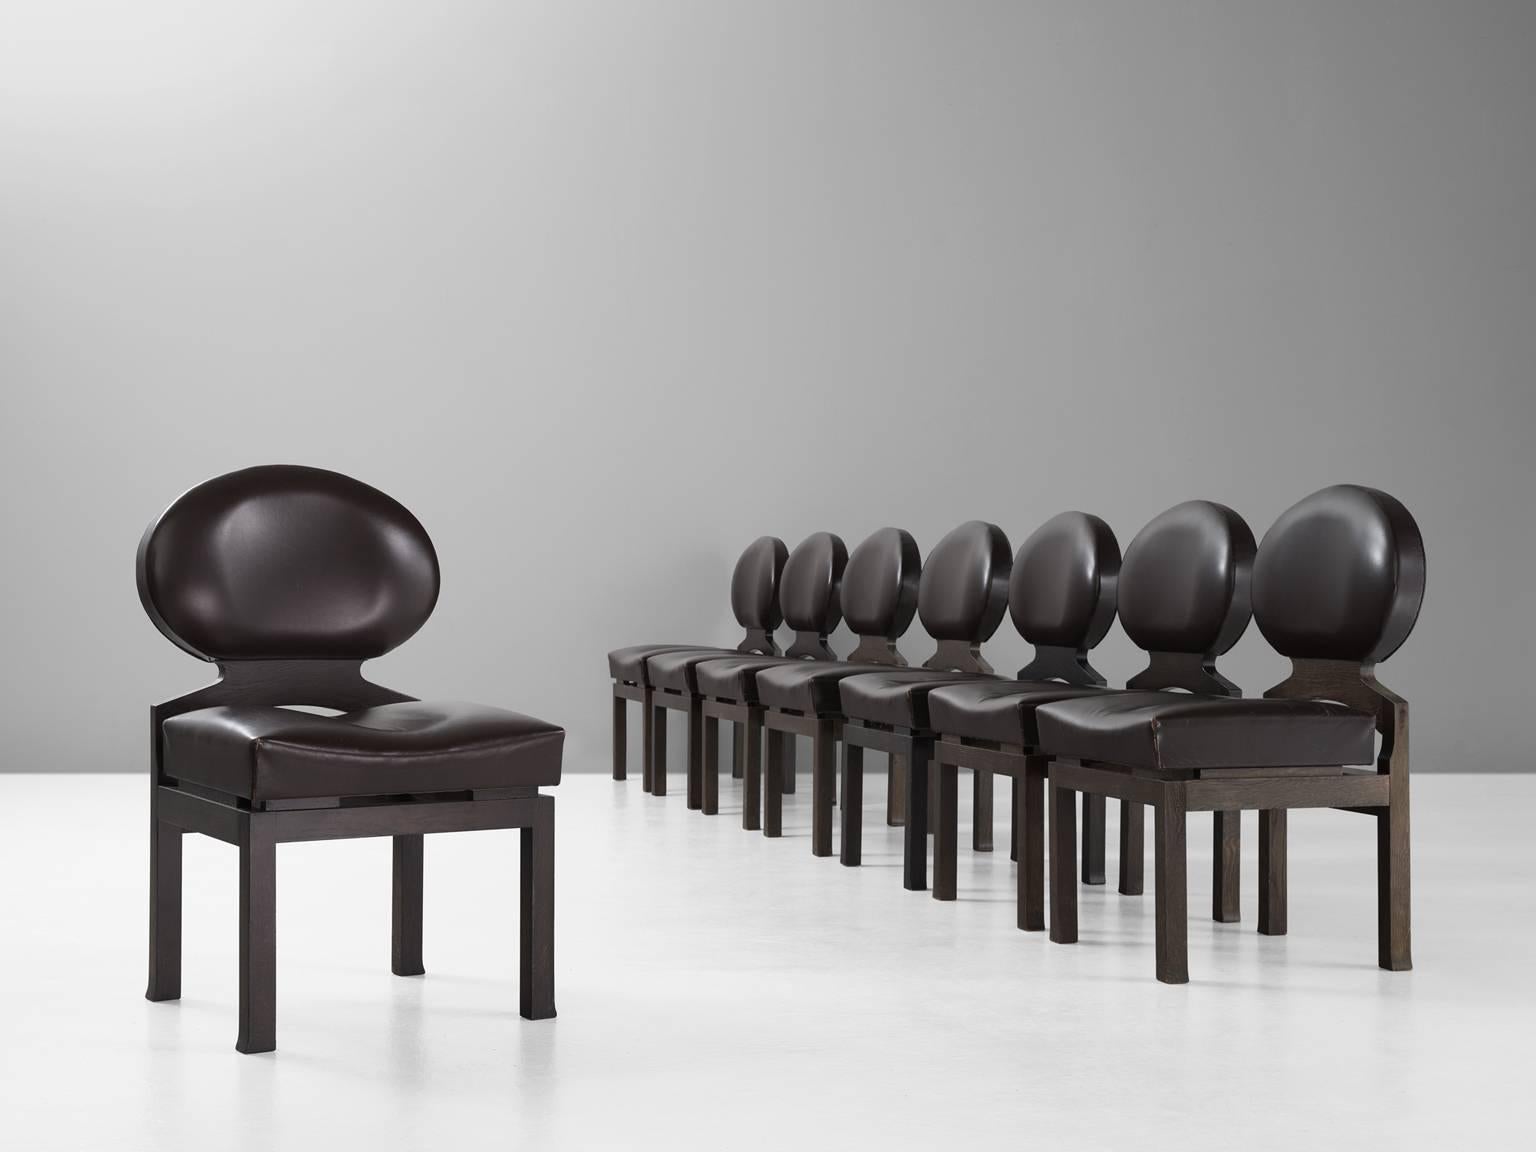 Set of eight 'Osaka' chairs, in oak and leather, by Emiel Veranneman, Belgium, 1970. 

The Osaka dining chair was designed by Emiel Veranneman for the Belgian pavilion at the 1970 Wold Exhibition in Osaka, Japan. These chairs are a combination of